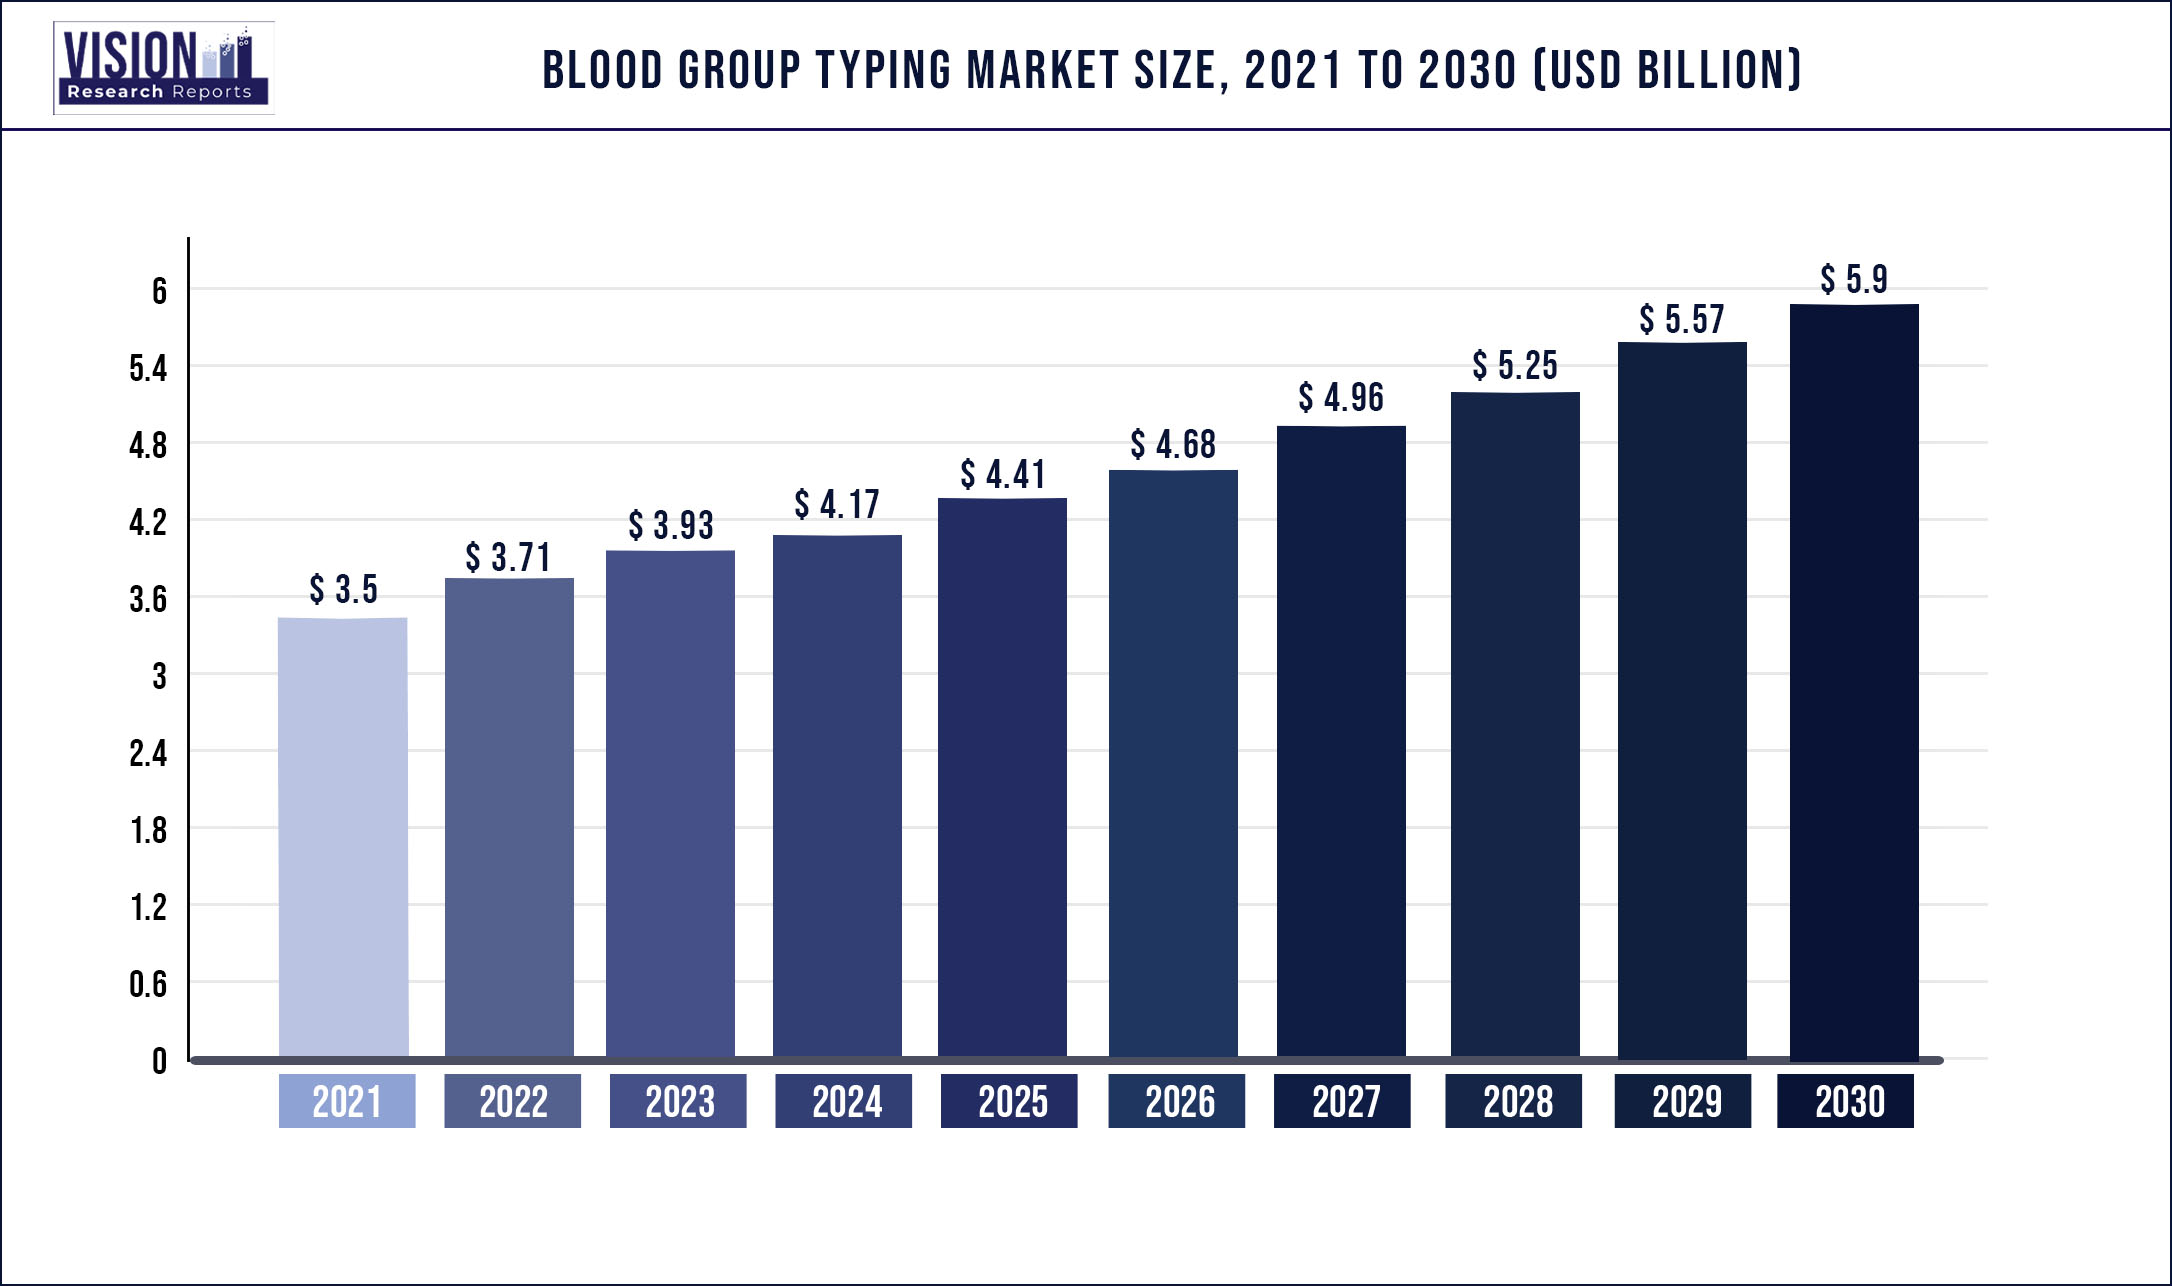 Blood Group Typing Market Size 2021 to 2030